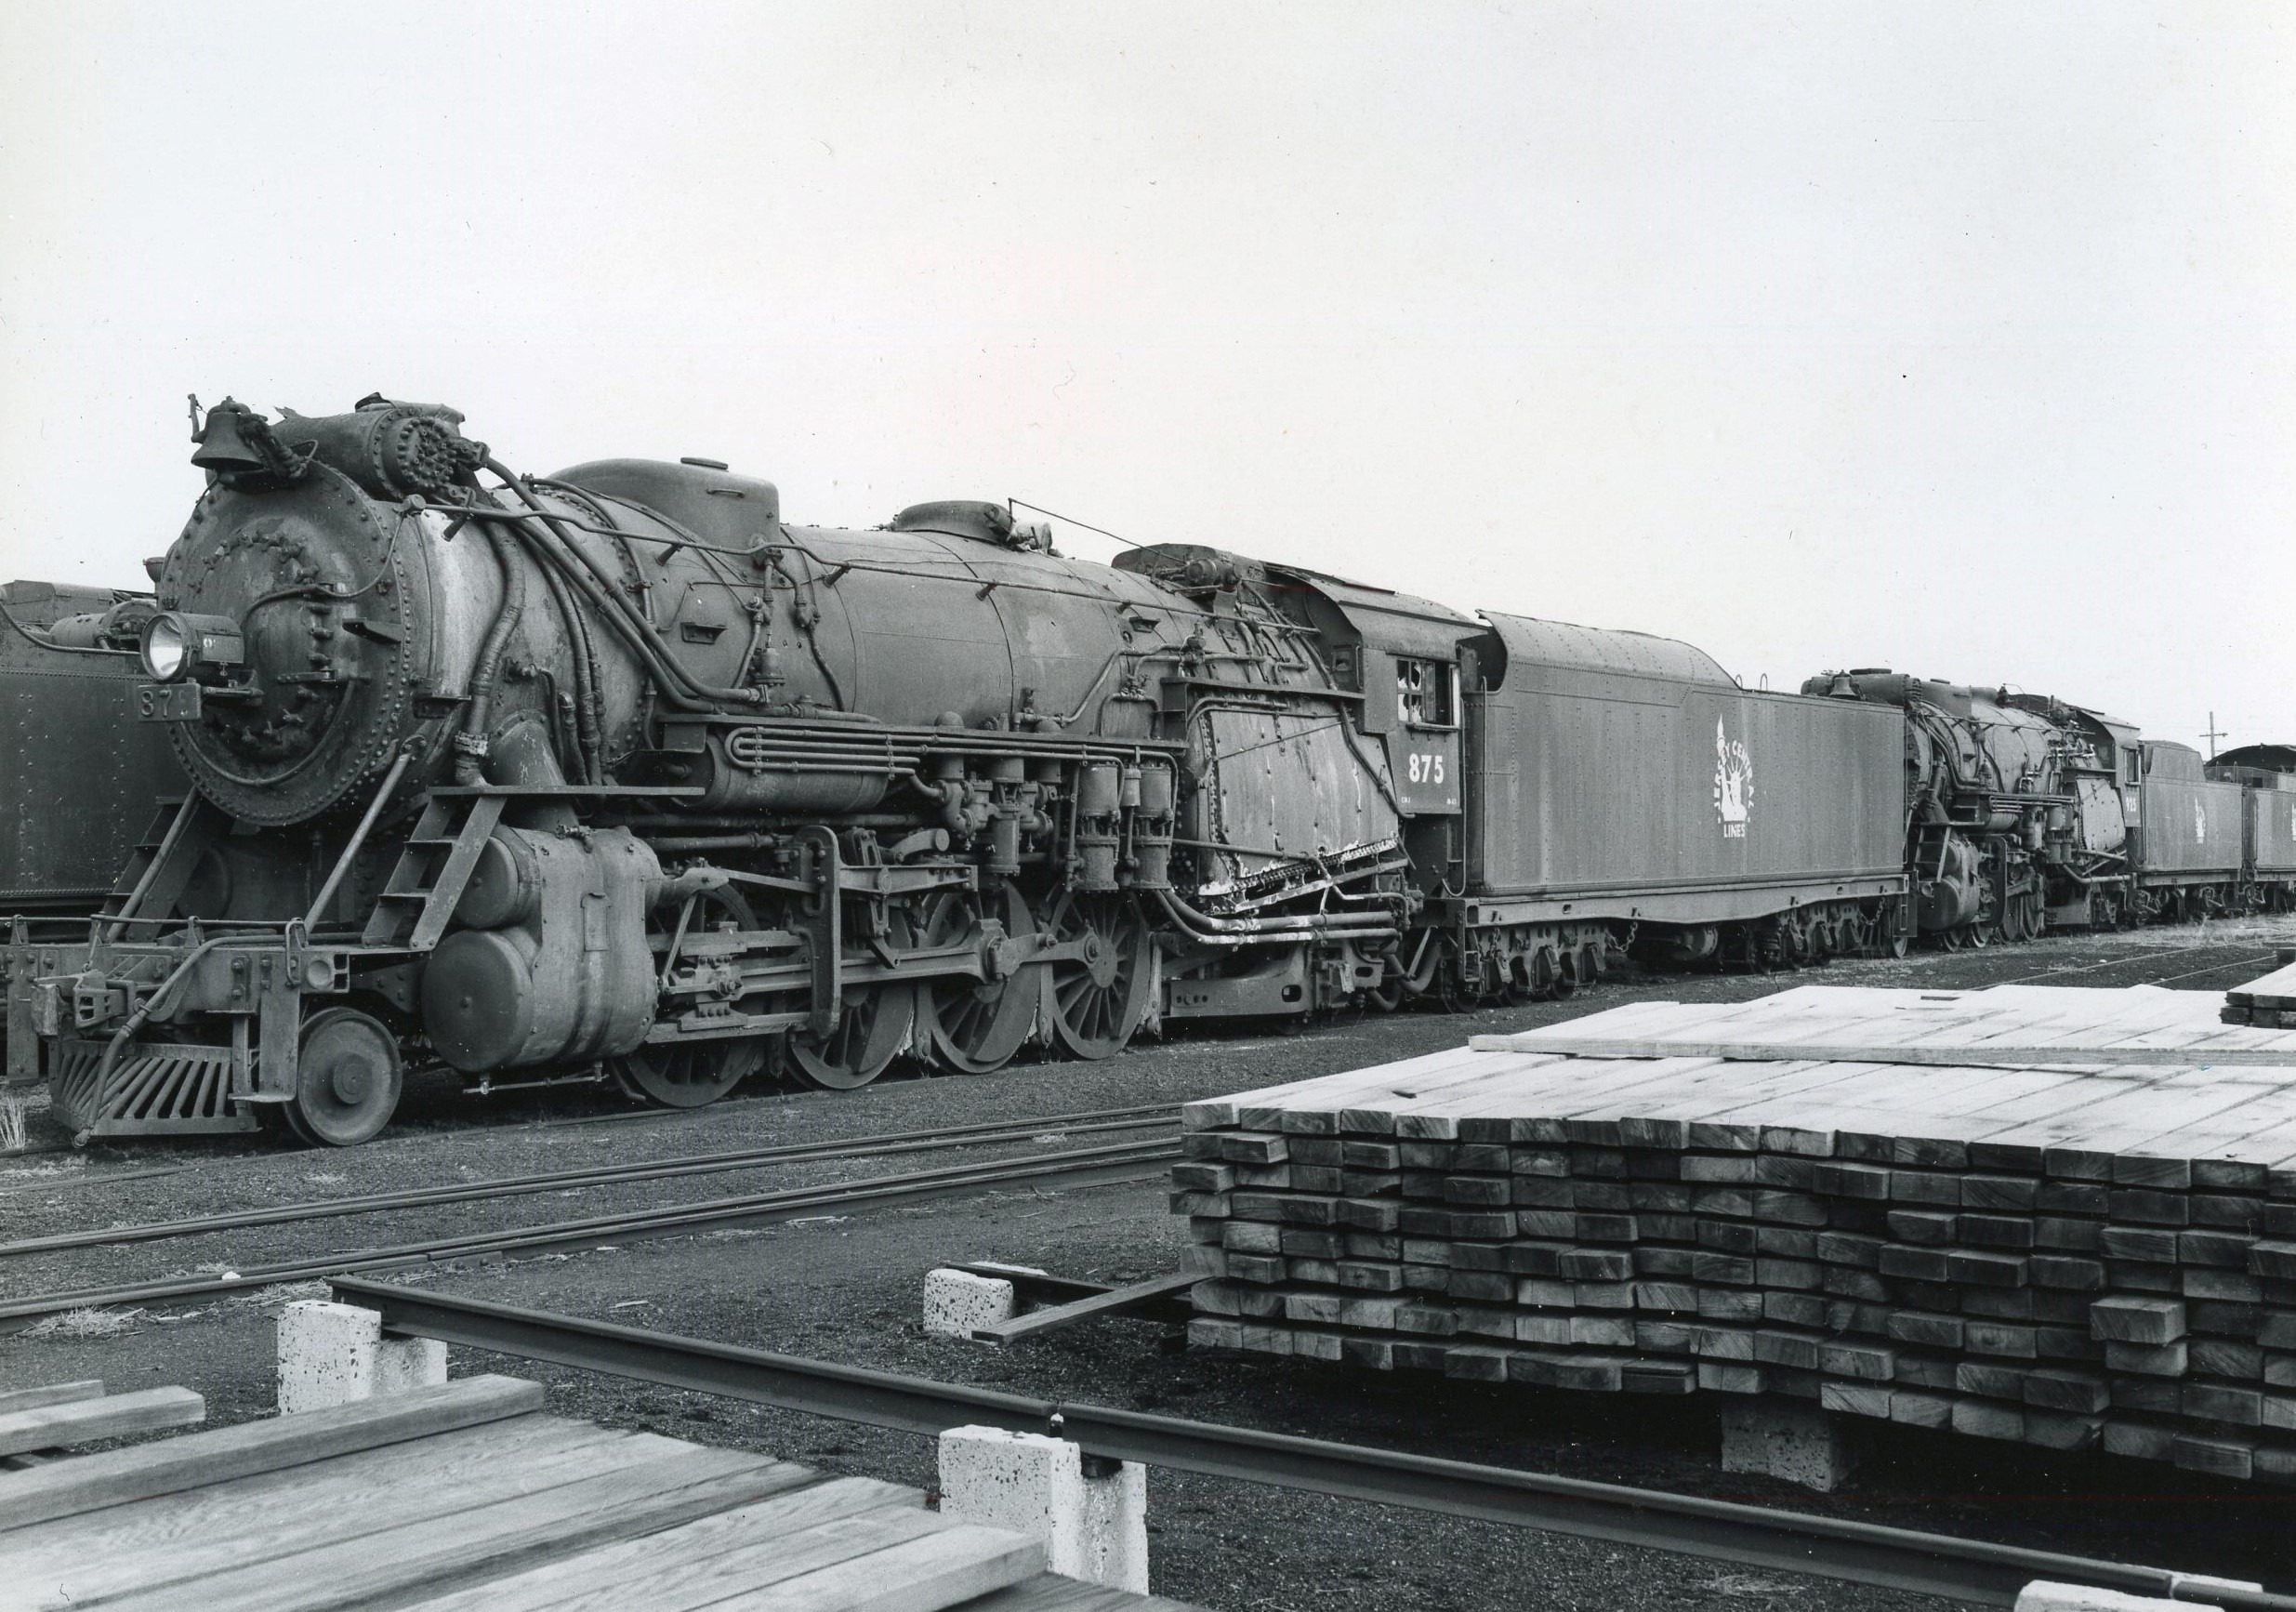 Central Railroad of New Jersey | Elizabethport, New Jersey | Brooks class 2-8-2 #875 steam locomotive | March 20, 1954 | R. L. Long photograph